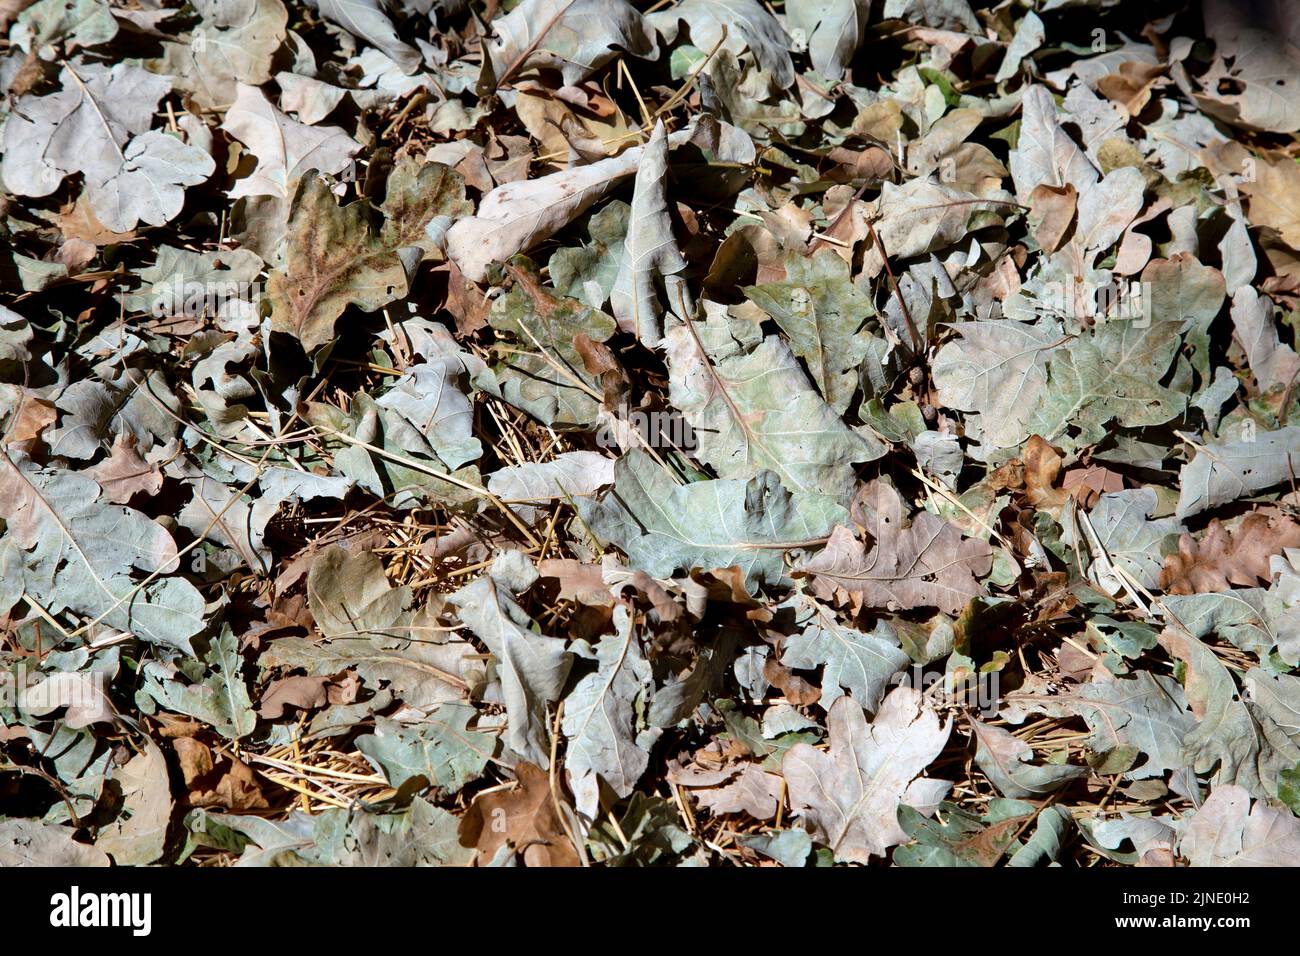 9 August 2022, London, UK - Green leaves dried from the sun and heat fallen from trees in the summer at Wanstead Flats during recent period of high temperatures Stock Photo